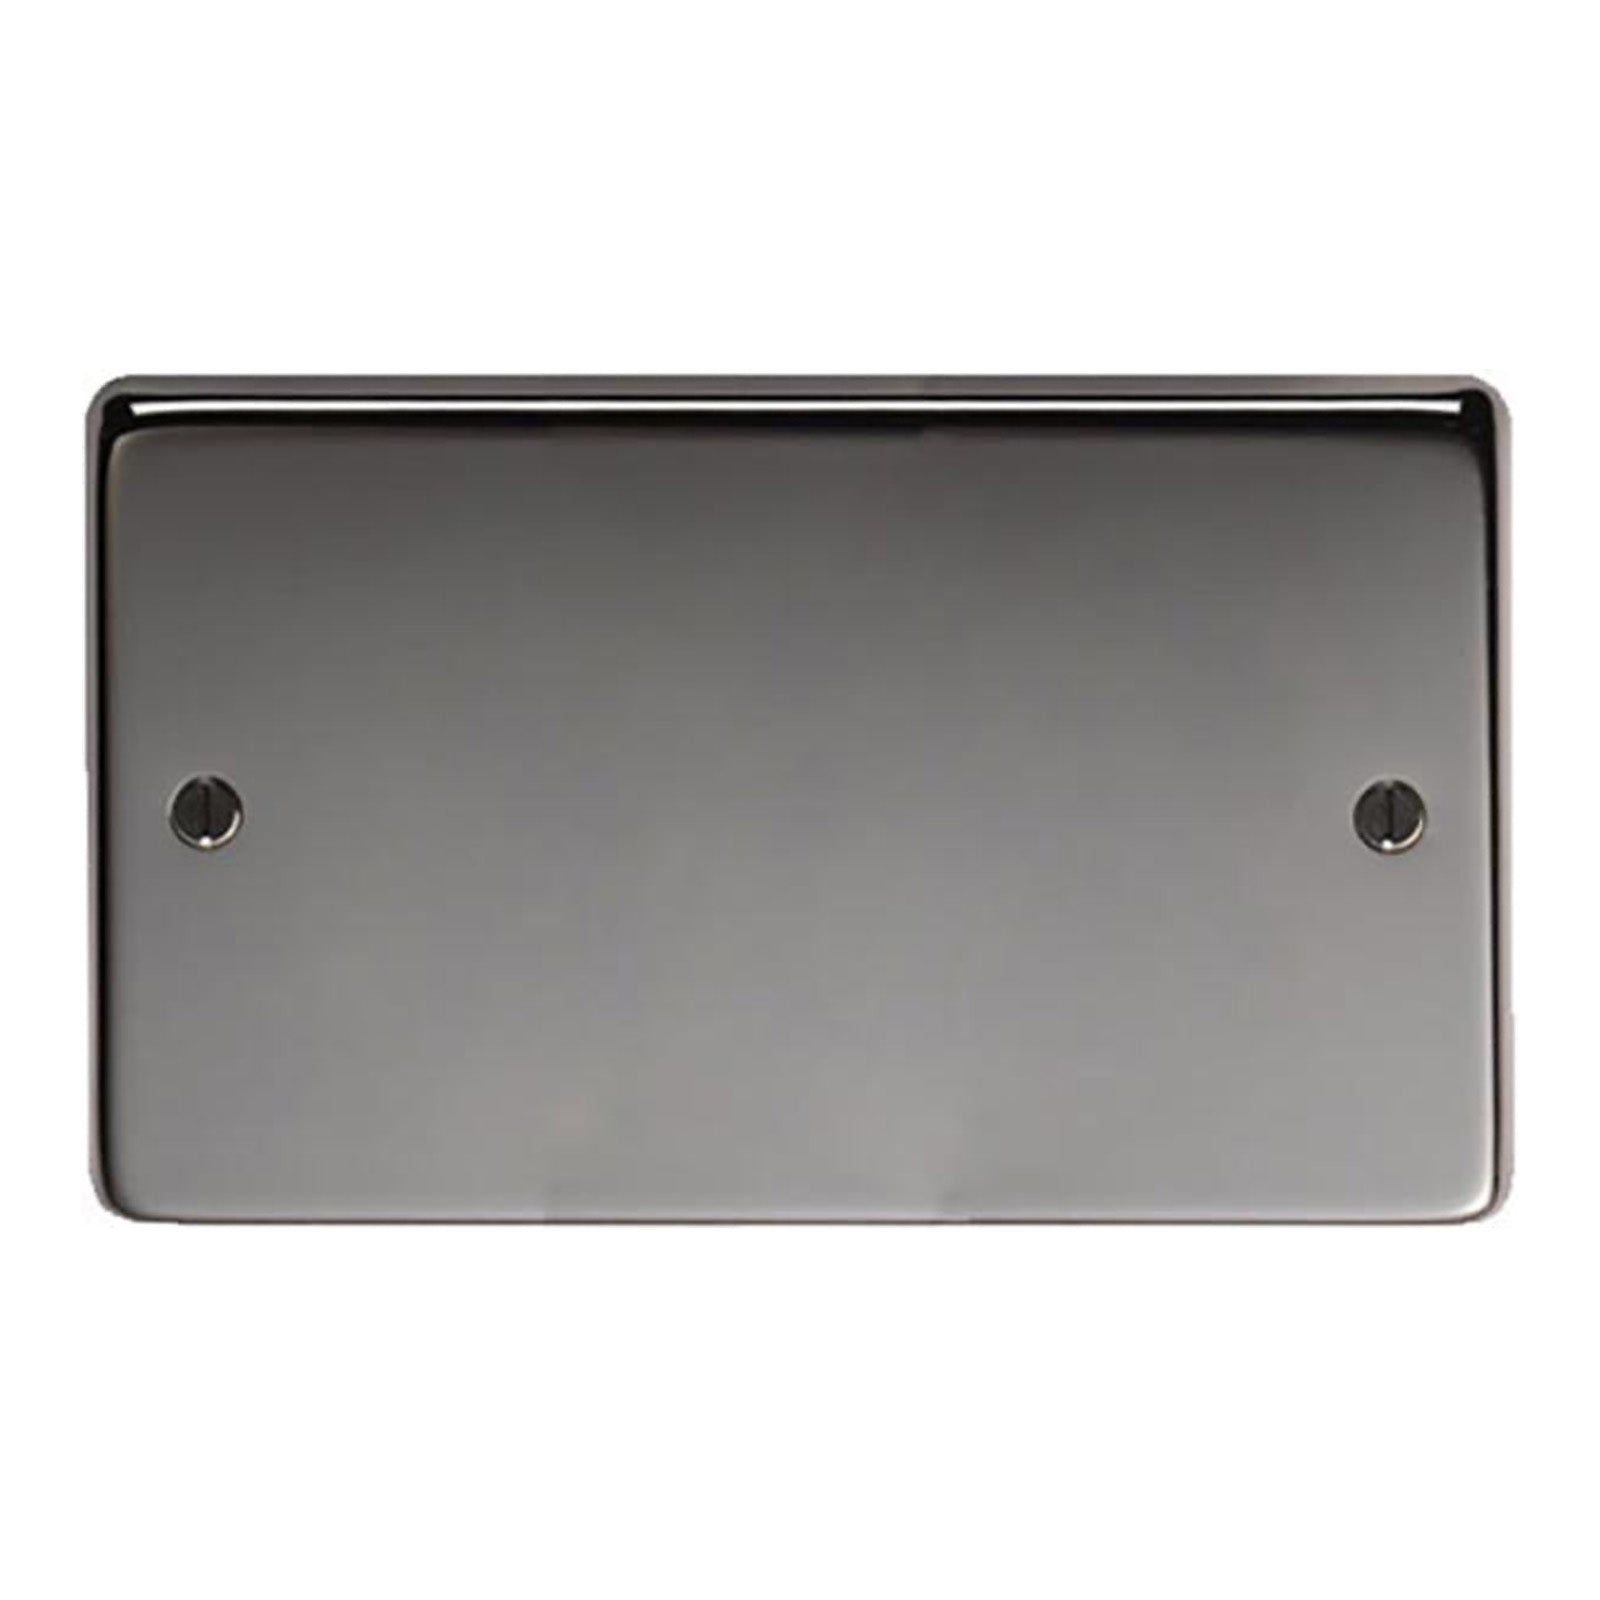 SHOW Image of Double Blank Plate with Black Nickel finish